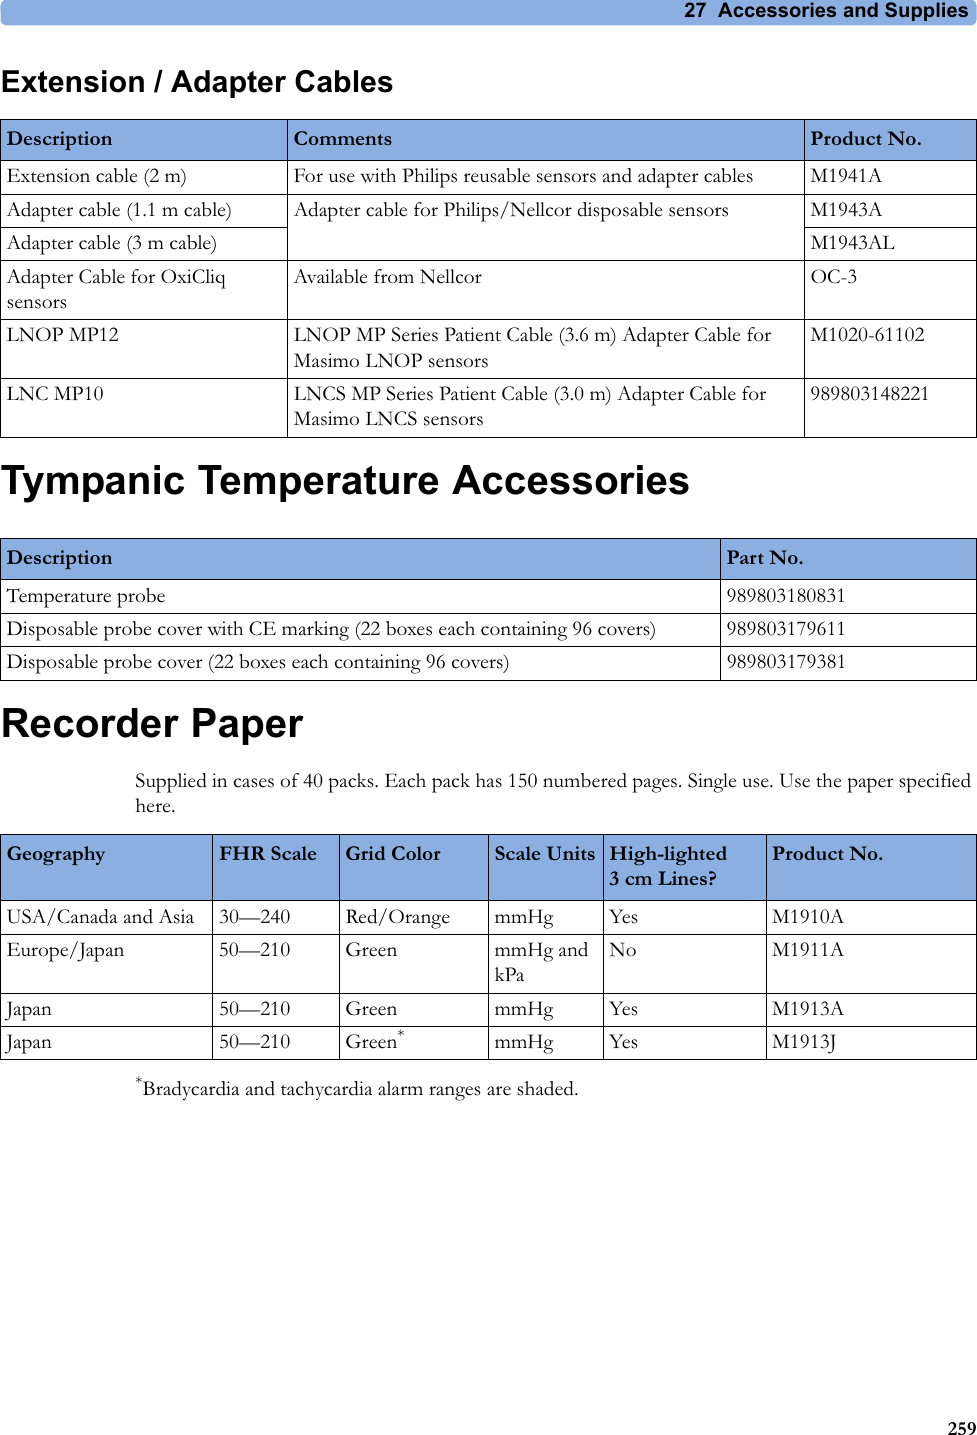 27  Accessories and Supplies259Extension / Adapter CablesTympanic Temperature AccessoriesRecorder PaperSupplied in cases of 40 packs. Each pack has 150 numbered pages. Single use. Use the paper specified here.*Bradycardia and tachycardia alarm ranges are shaded.Description Comments Product No.Extension cable (2 m) For use with Philips reusable sensors and adapter cables M1941AAdapter cable (1.1 m cable) Adapter cable for Philips/Nellcor disposable sensors M1943AAdapter cable (3 m cable) M1943ALAdapter Cable for OxiCliq sensorsAvailable from Nellcor OC-3LNOP MP12 LNOP MP Series Patient Cable (3.6 m) Adapter Cable for Masimo LNOP sensorsM1020-61102LNC MP10 LNCS MP Series Patient Cable (3.0 m) Adapter Cable for Masimo LNCS sensors989803148221Description Part No.Temperature probe 989803180831Disposable probe cover with CE marking (22 boxes each containing 96 covers) 989803179611Disposable probe cover (22 boxes each containing 96 covers) 989803179381Geography FHR Scale Grid Color Scale Units High-lighted 3 cm Lines?Product No.USA/Canada and Asia 30—240 Red/Orange mmHg Yes M1910AEurope/Japan 50—210 Green mmHg and kPaNo M1911AJapan 50—210 Green mmHg Yes M1913AJapan 50—210 Green*mmHg Yes M1913J